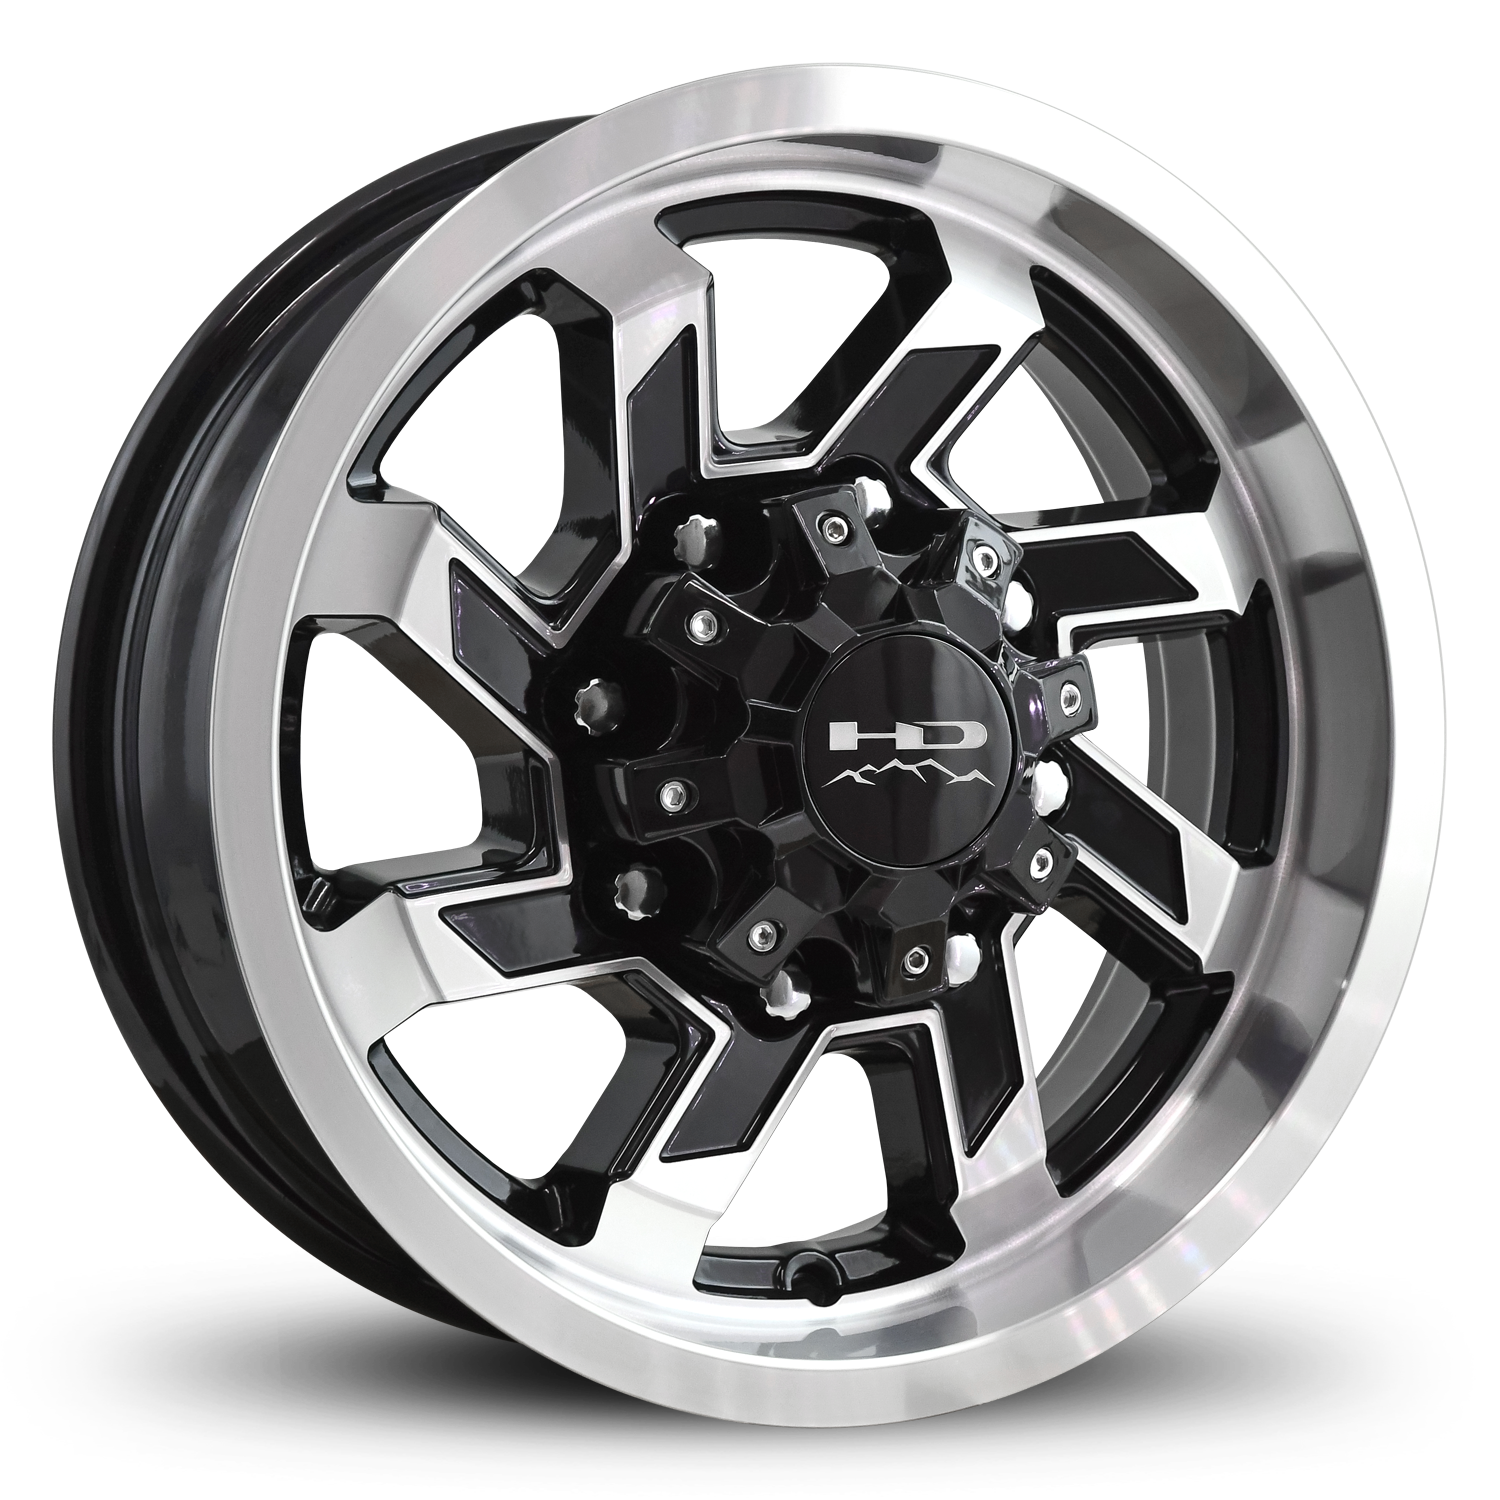 HD Off-Road SAW Custom Trailer Wheels in 16x6.0 in 8 lug Gloss Black Machined Face & Lip for Unility, Boat, Car, Construction, Horse, & RV